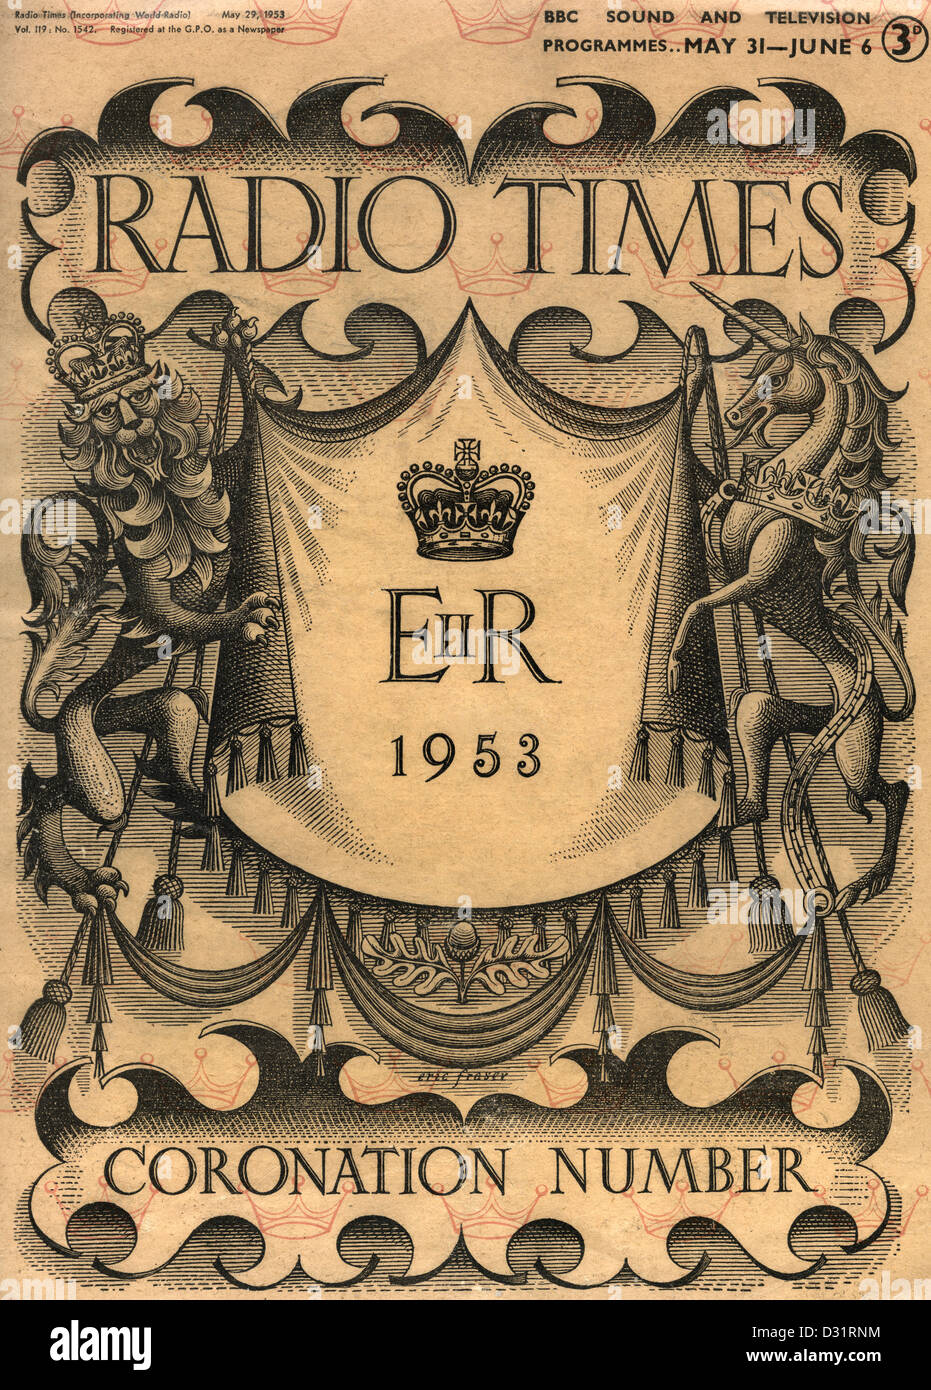 CORONATION BBC Historic front cover The Radio Times featuring 1953 broadcast coverage of Queen Elizabeth II Coronation at Westminster Abbey London UK. Stock Photo